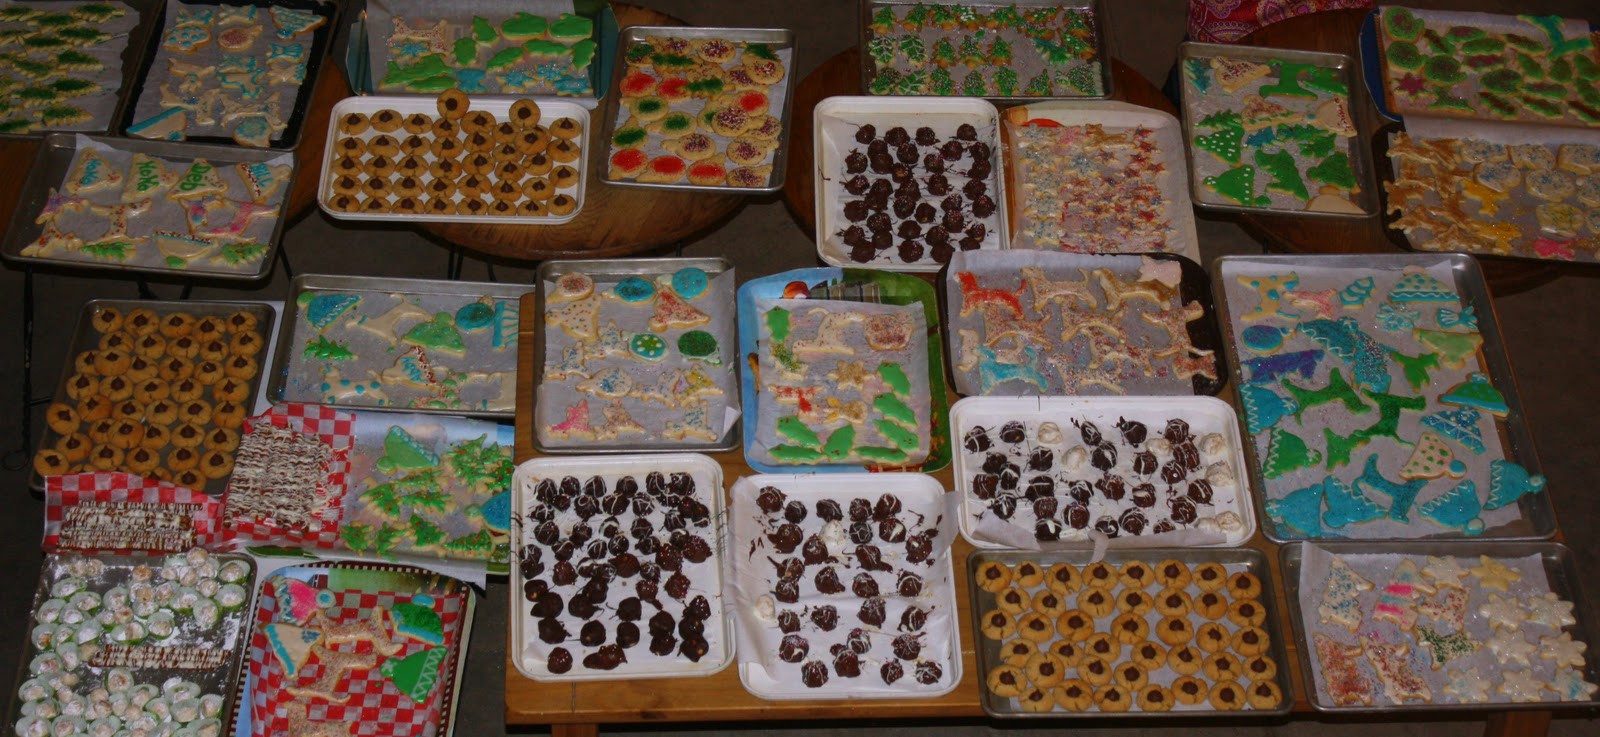 Assorted Christmas Cookies
 Rah Cha Chow Peanut Butter Blossoms and Other Christmas